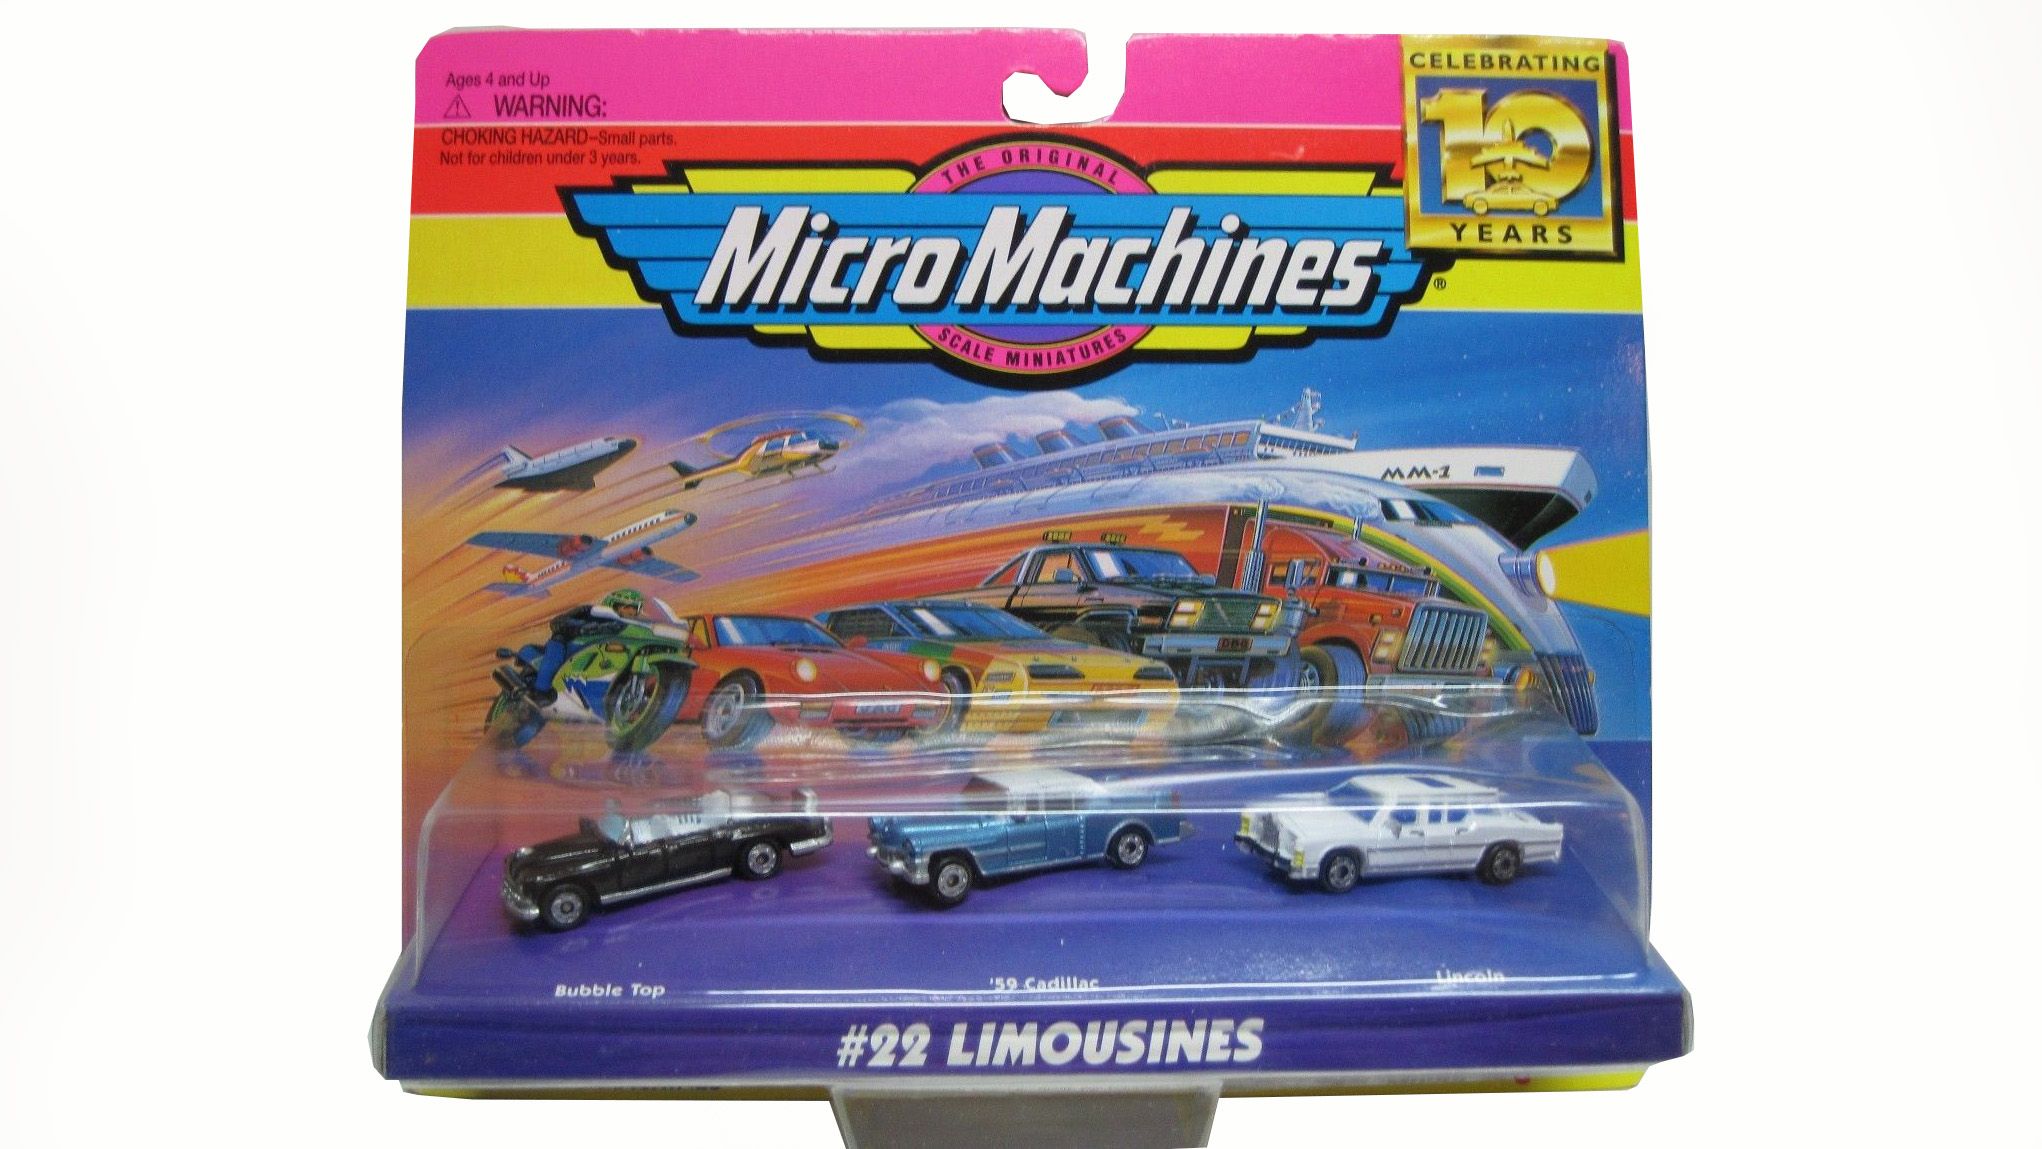 Micro Machines will make a comeback to shelves as Hasbro revives line